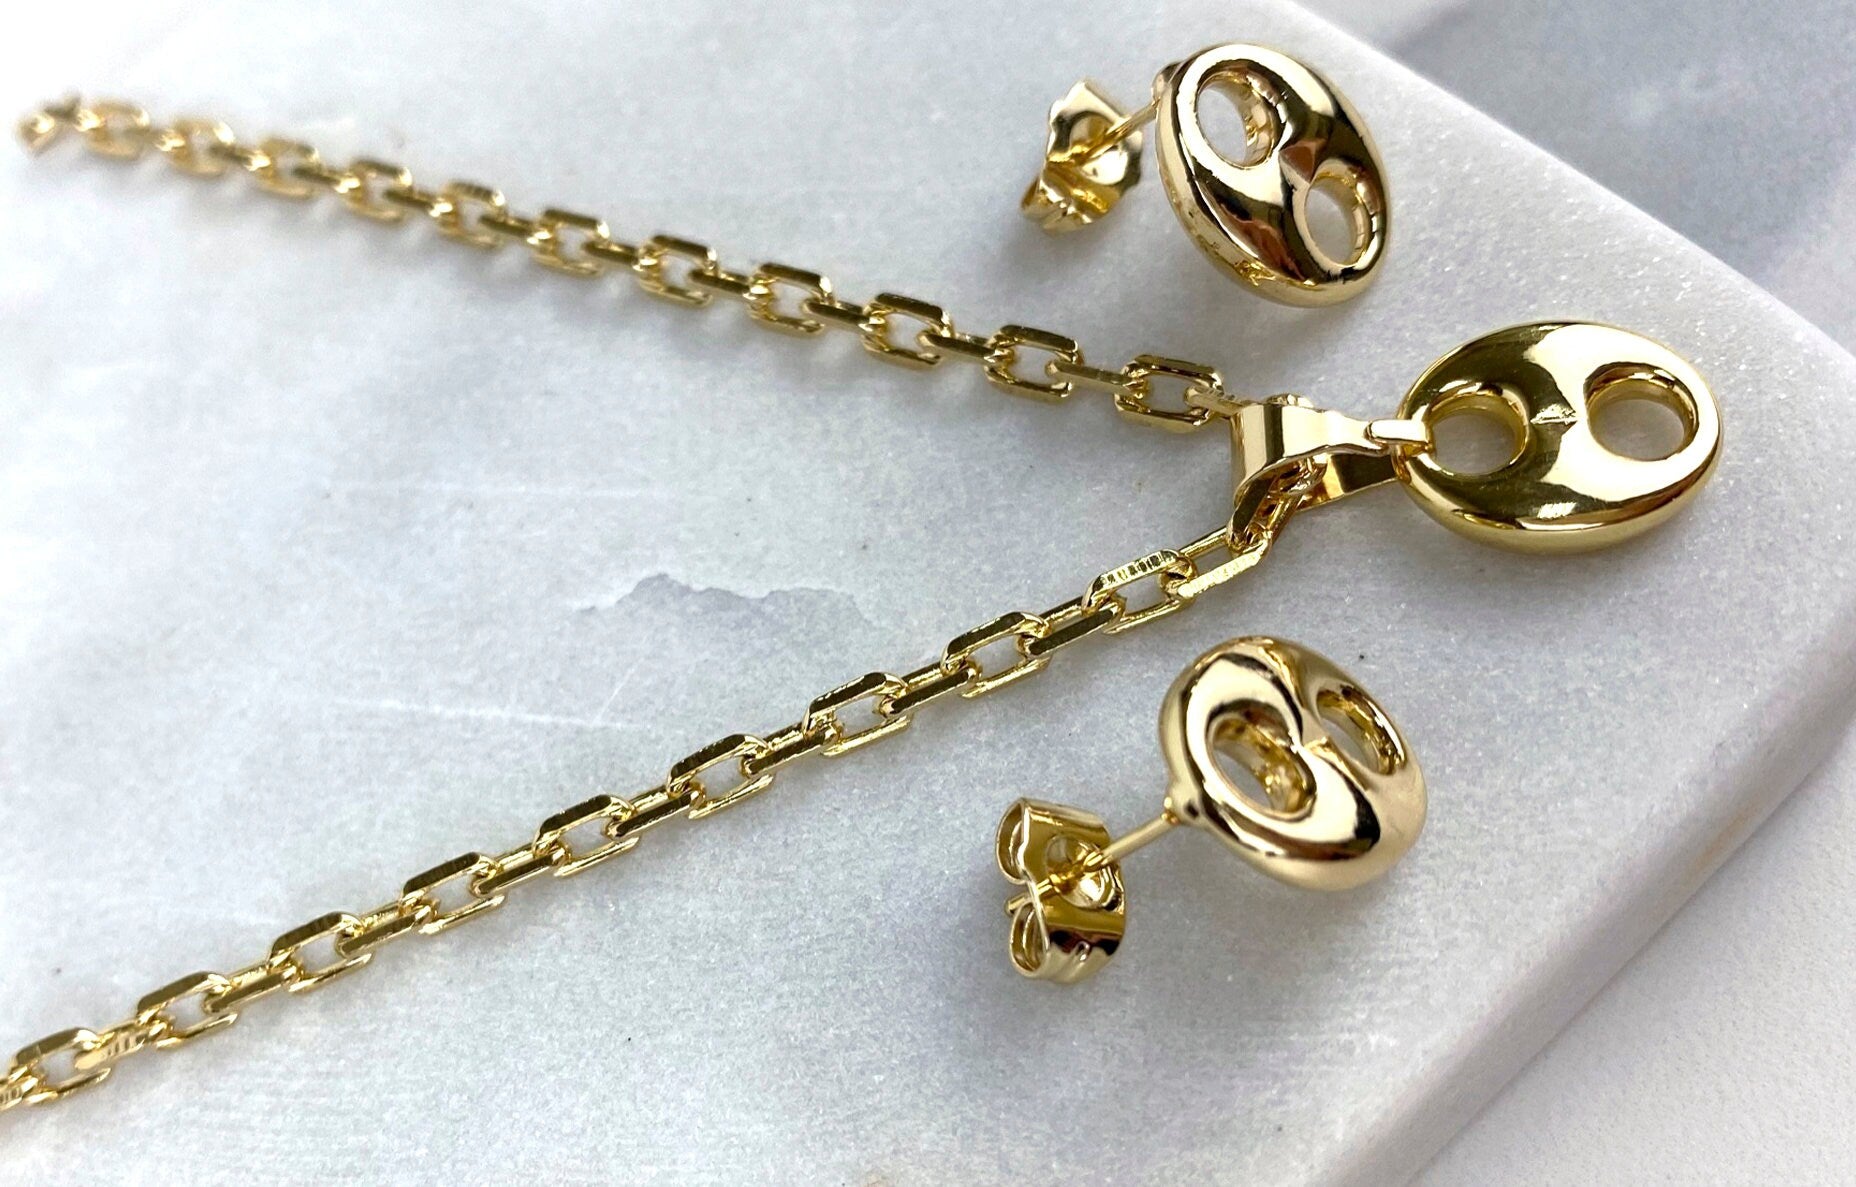 18k Gold Filled Paper Clip Chain Necklace Set with Anchor Mariner Stud Earring & Charms Pendant Wholesale Jewelry Supplies